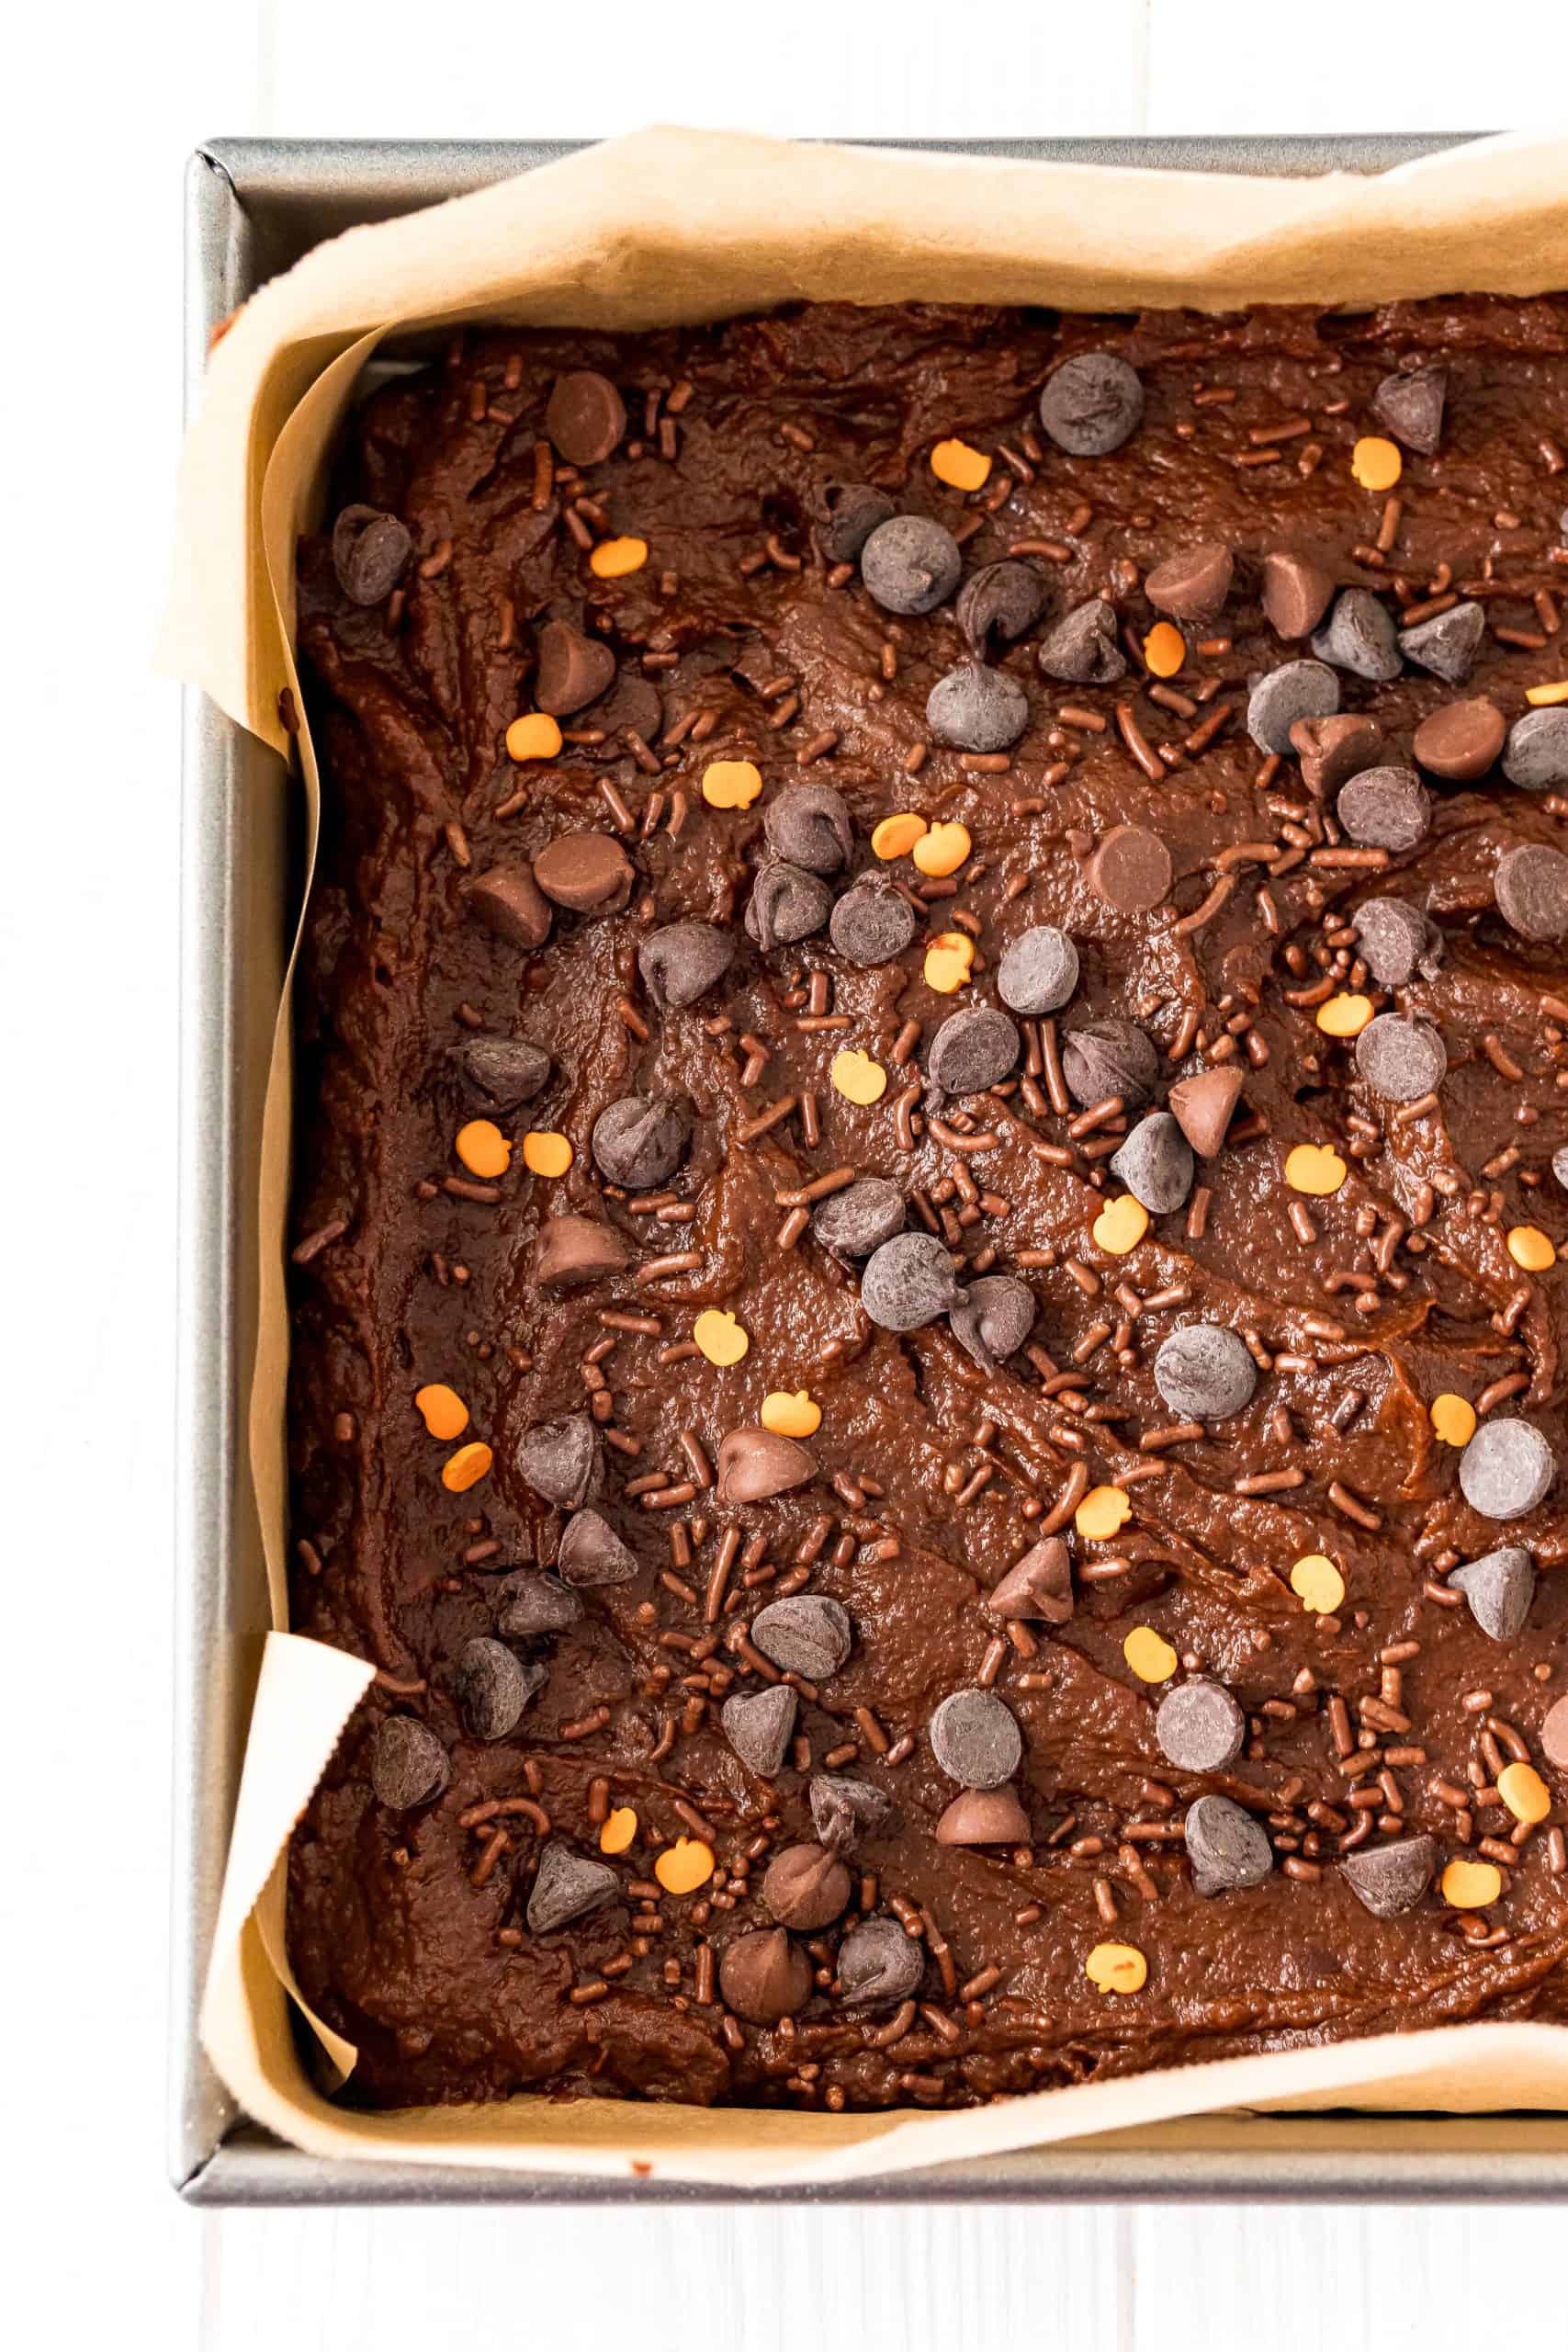 pumpkin chocolate cake batter spread into a square baking pan lined with brown parchment paper.